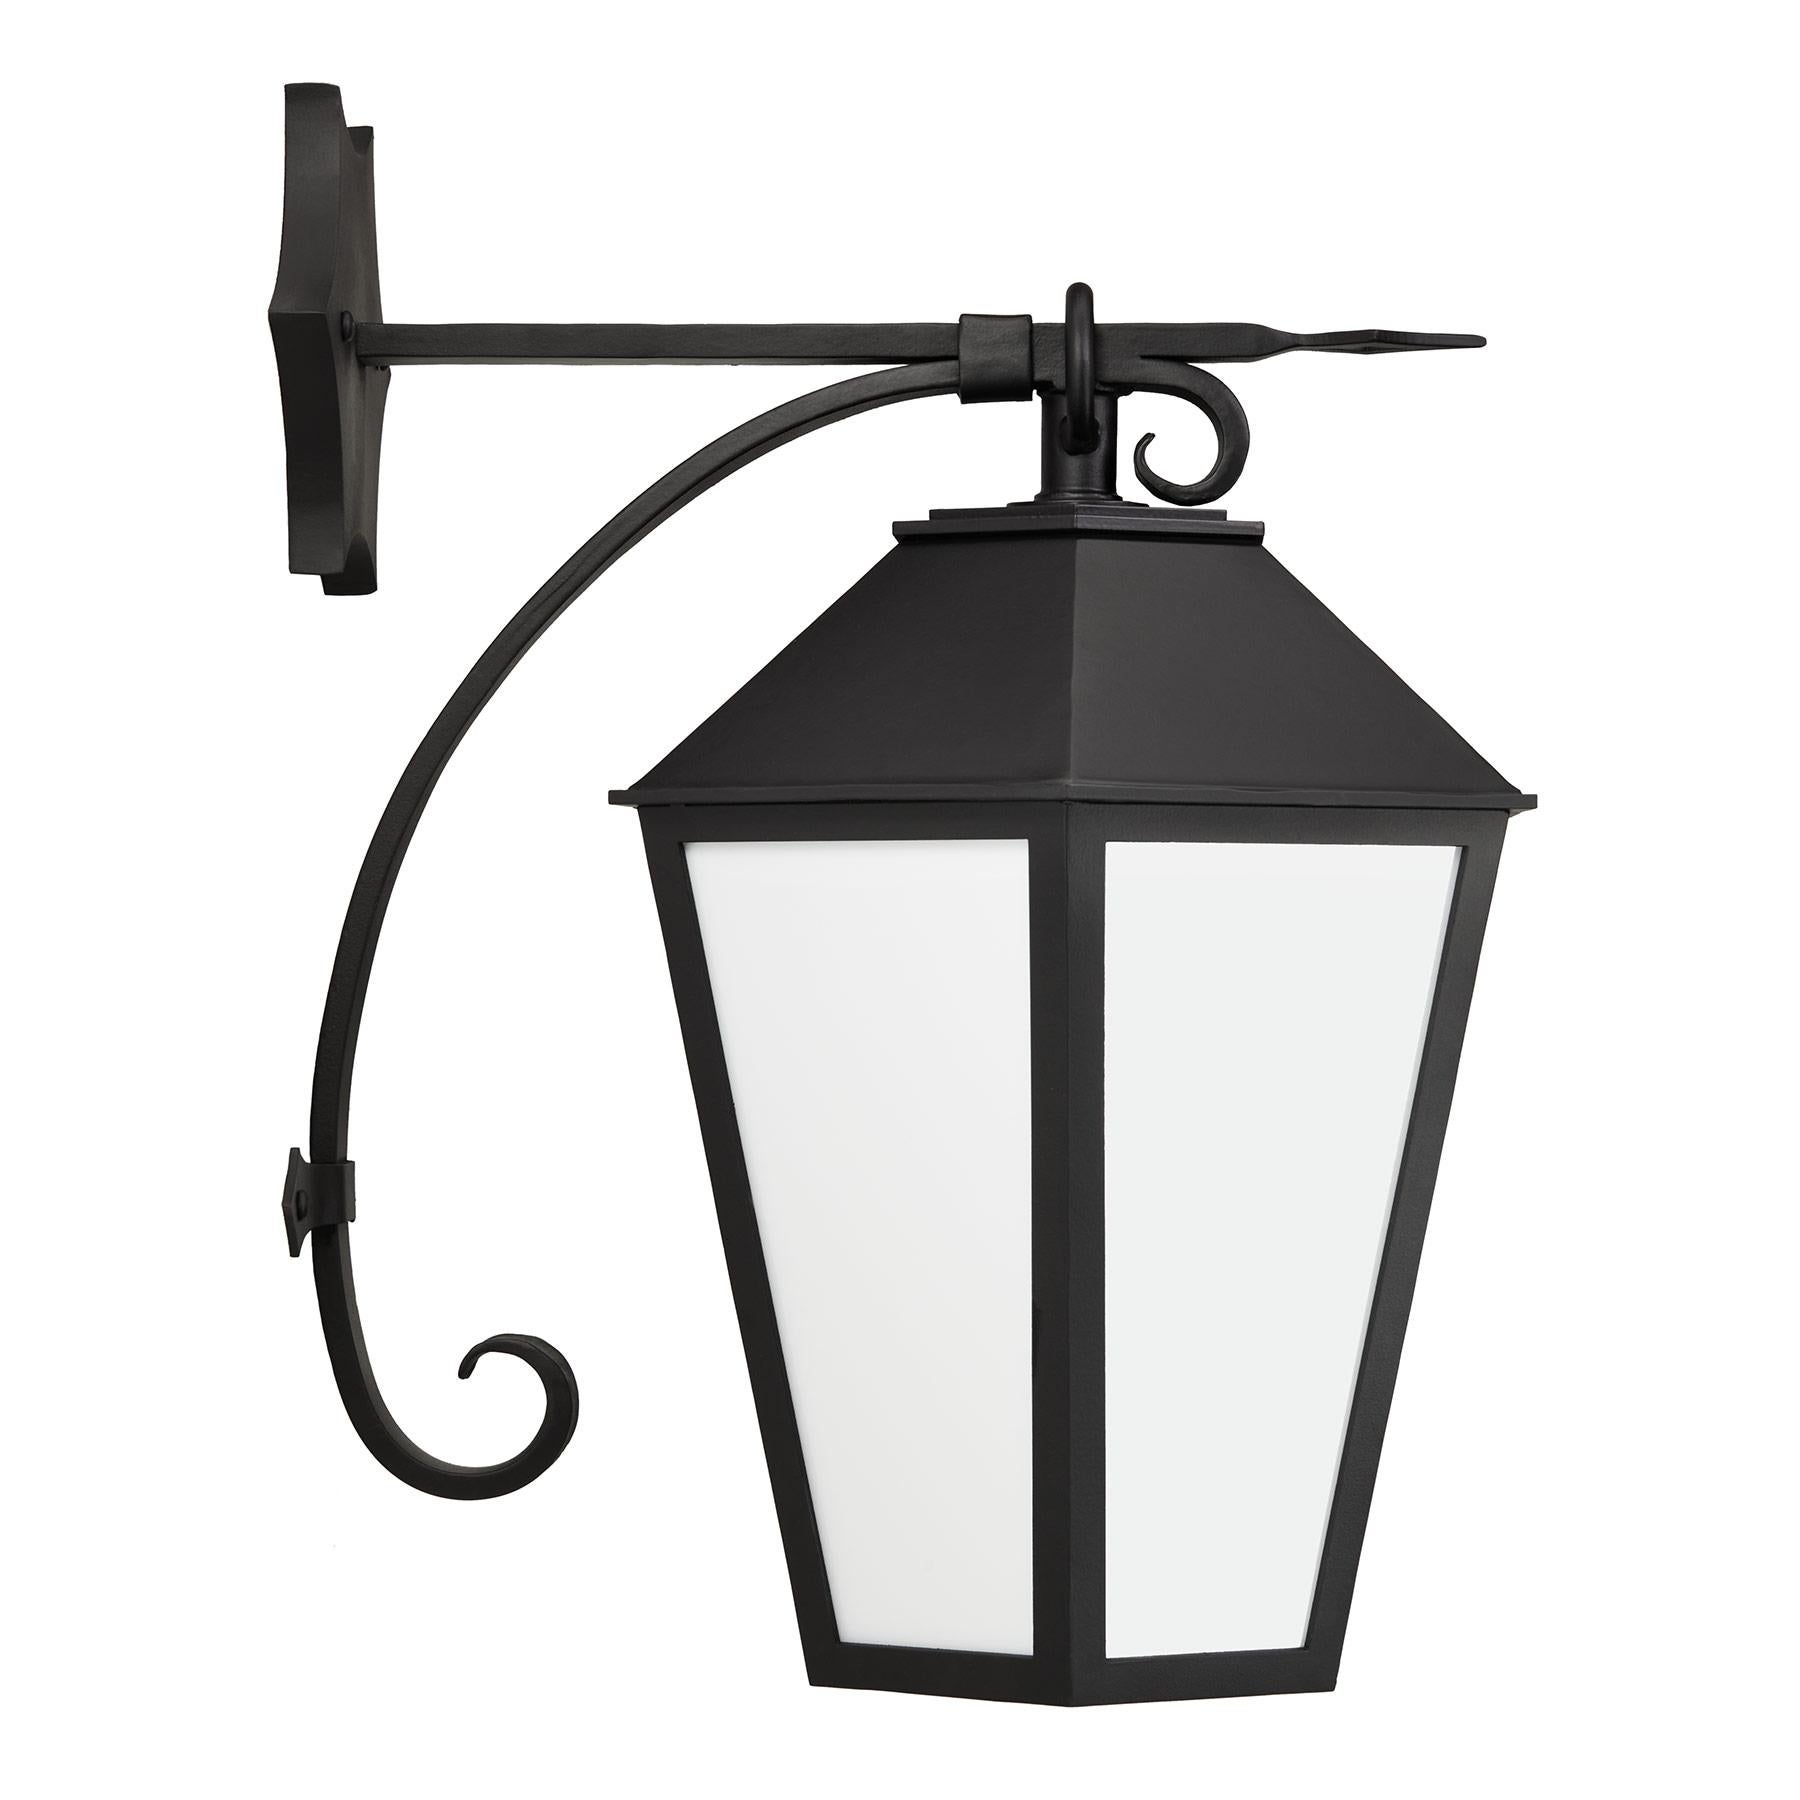 Spanish Style Wrought Iron Exterior Lantern Wall Mount (Dark Sky Compliant) In New Condition For Sale In Santa Paula, CA